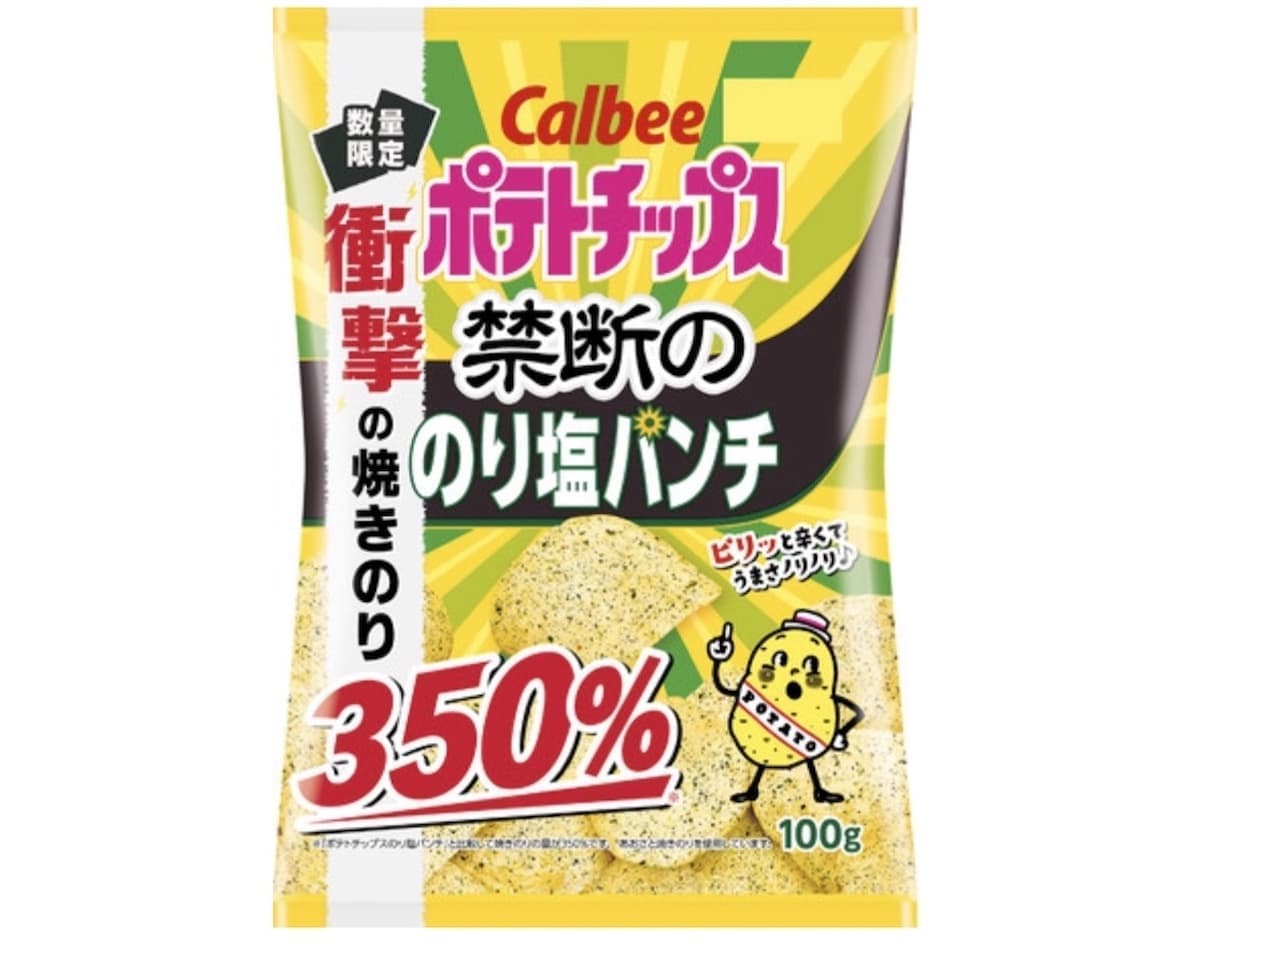 "Potato Chips Forbidden Nori Salt Punch" The forbidden taste is powered up and revived